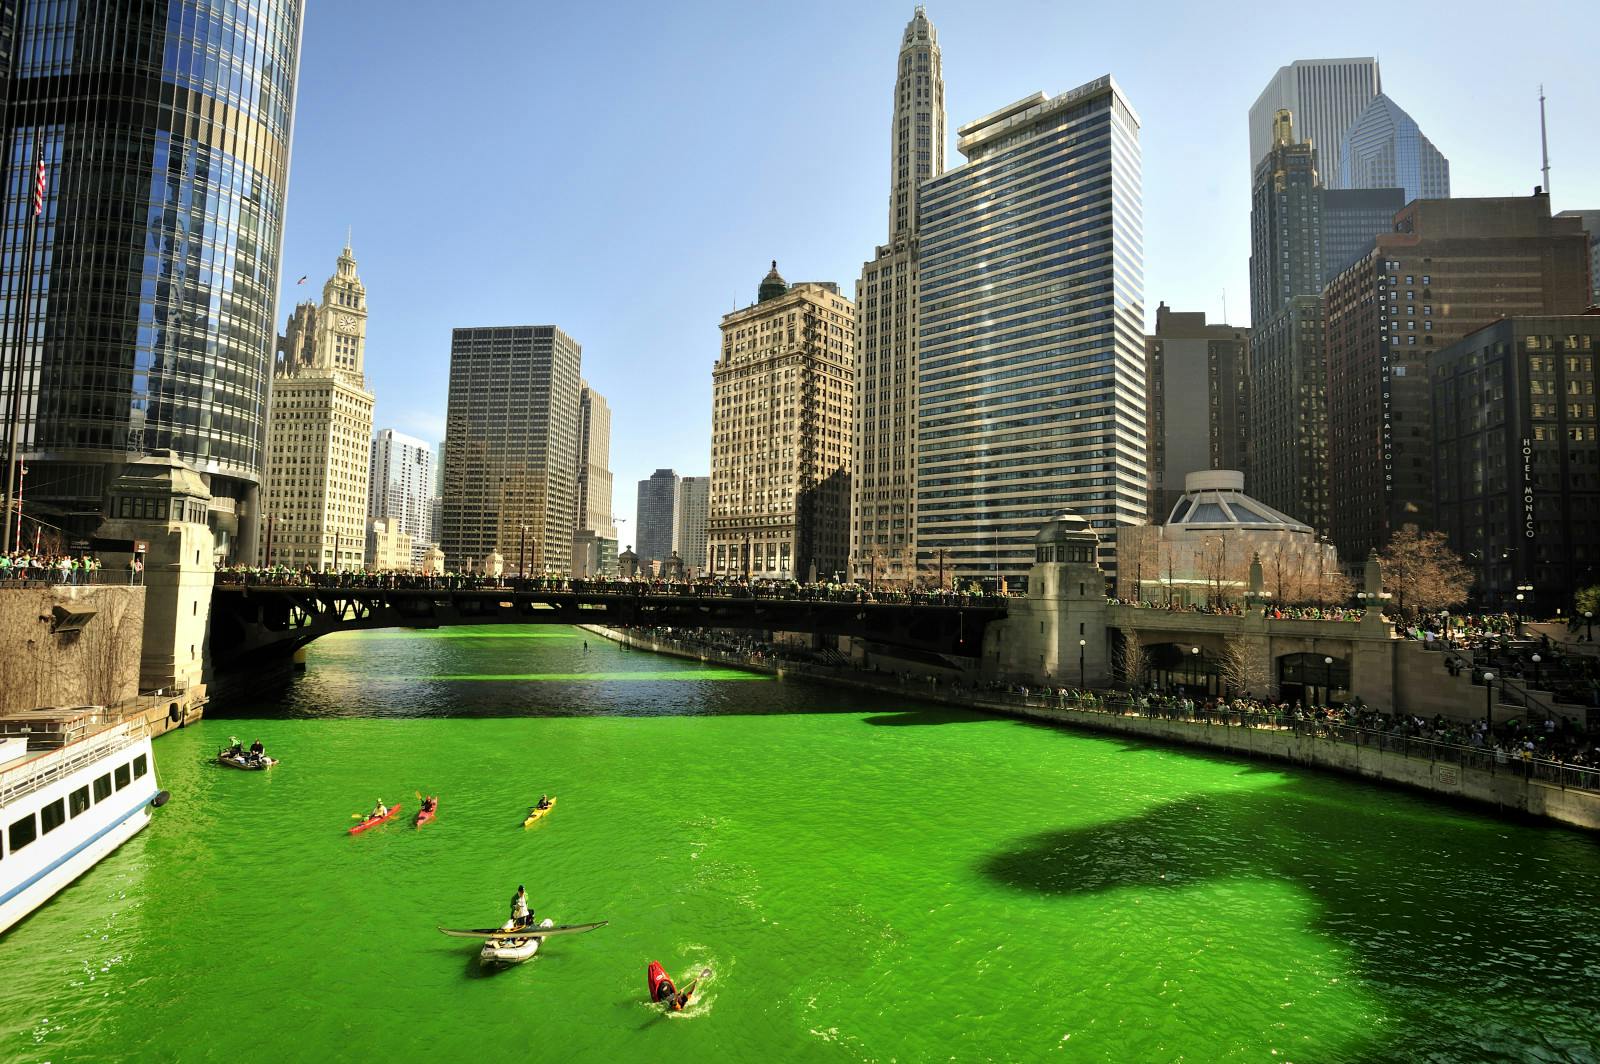 Each year as part of the St. Patrick's Day Parade celebration when the Chicago River turns an incredible shade of Irish green. The Chicago Journeymen Plumbers are responsible and it is a privately funded operation. (Yannick Tylle)